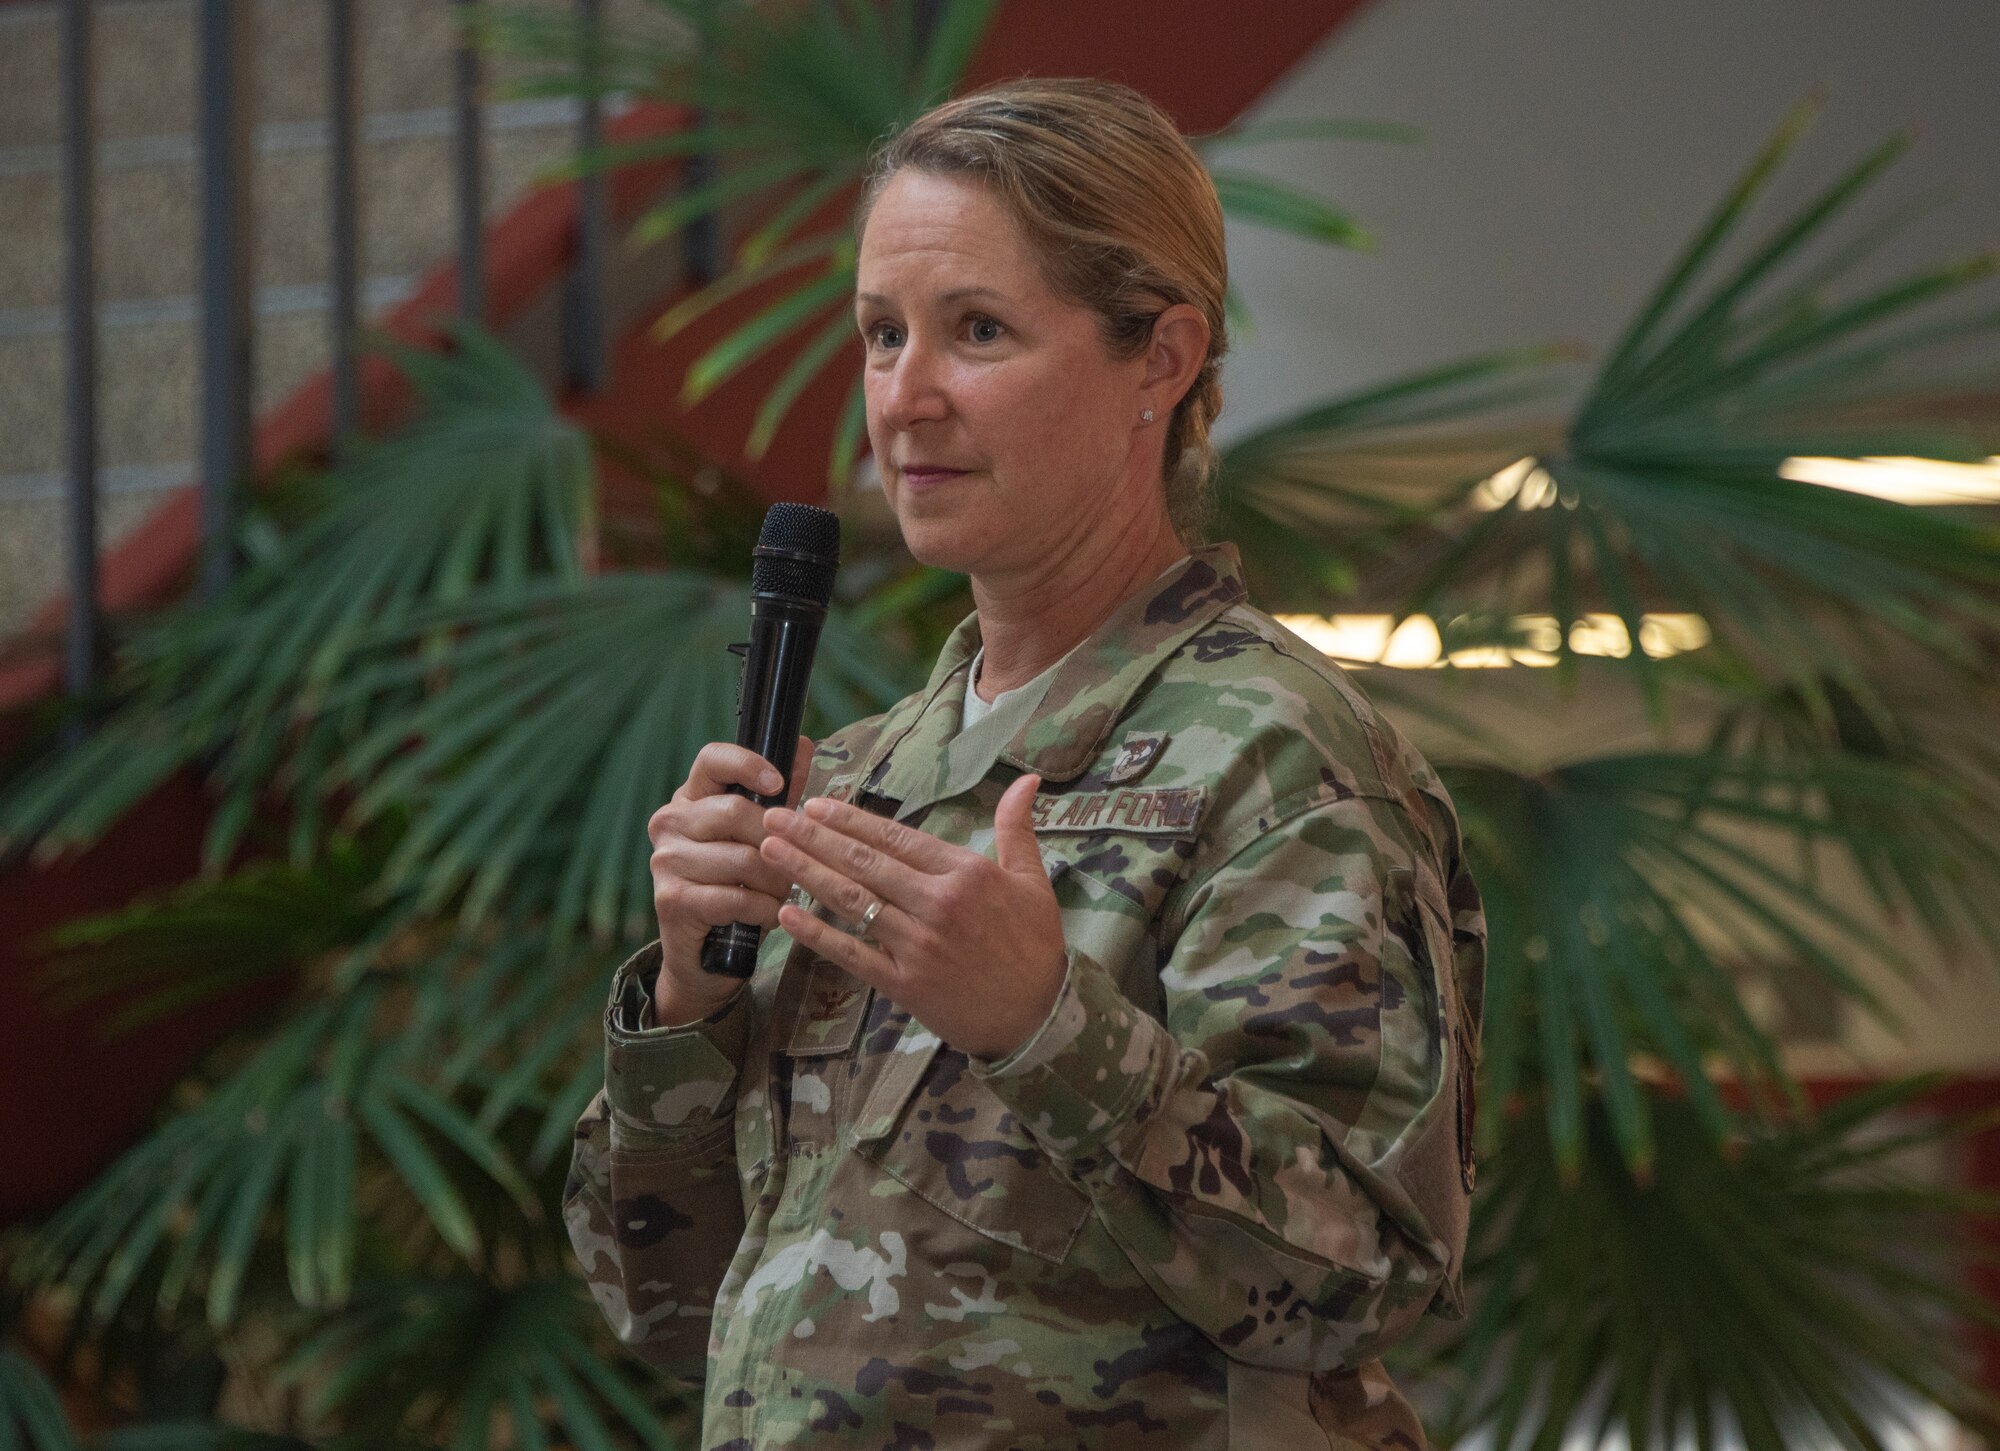 U.S. Air Force Col. Kristen Beals, 60th Medical Group commander, delivers remarks during the Women’s History Month social gathering, March 20, 2019, at Travis Air Force Base, California. Since 1987, the month of March has been designated to celebrate the historical and ongoing achievements and contributions of women. Members of the Women Inspiring the Next Generation’s Success committee were responsible for organizing the event which included an exhibit highlighting extraordinary female heroes and featured speakers prominent in the Travis community. (U.S. Air Force photo by Heide Couch)